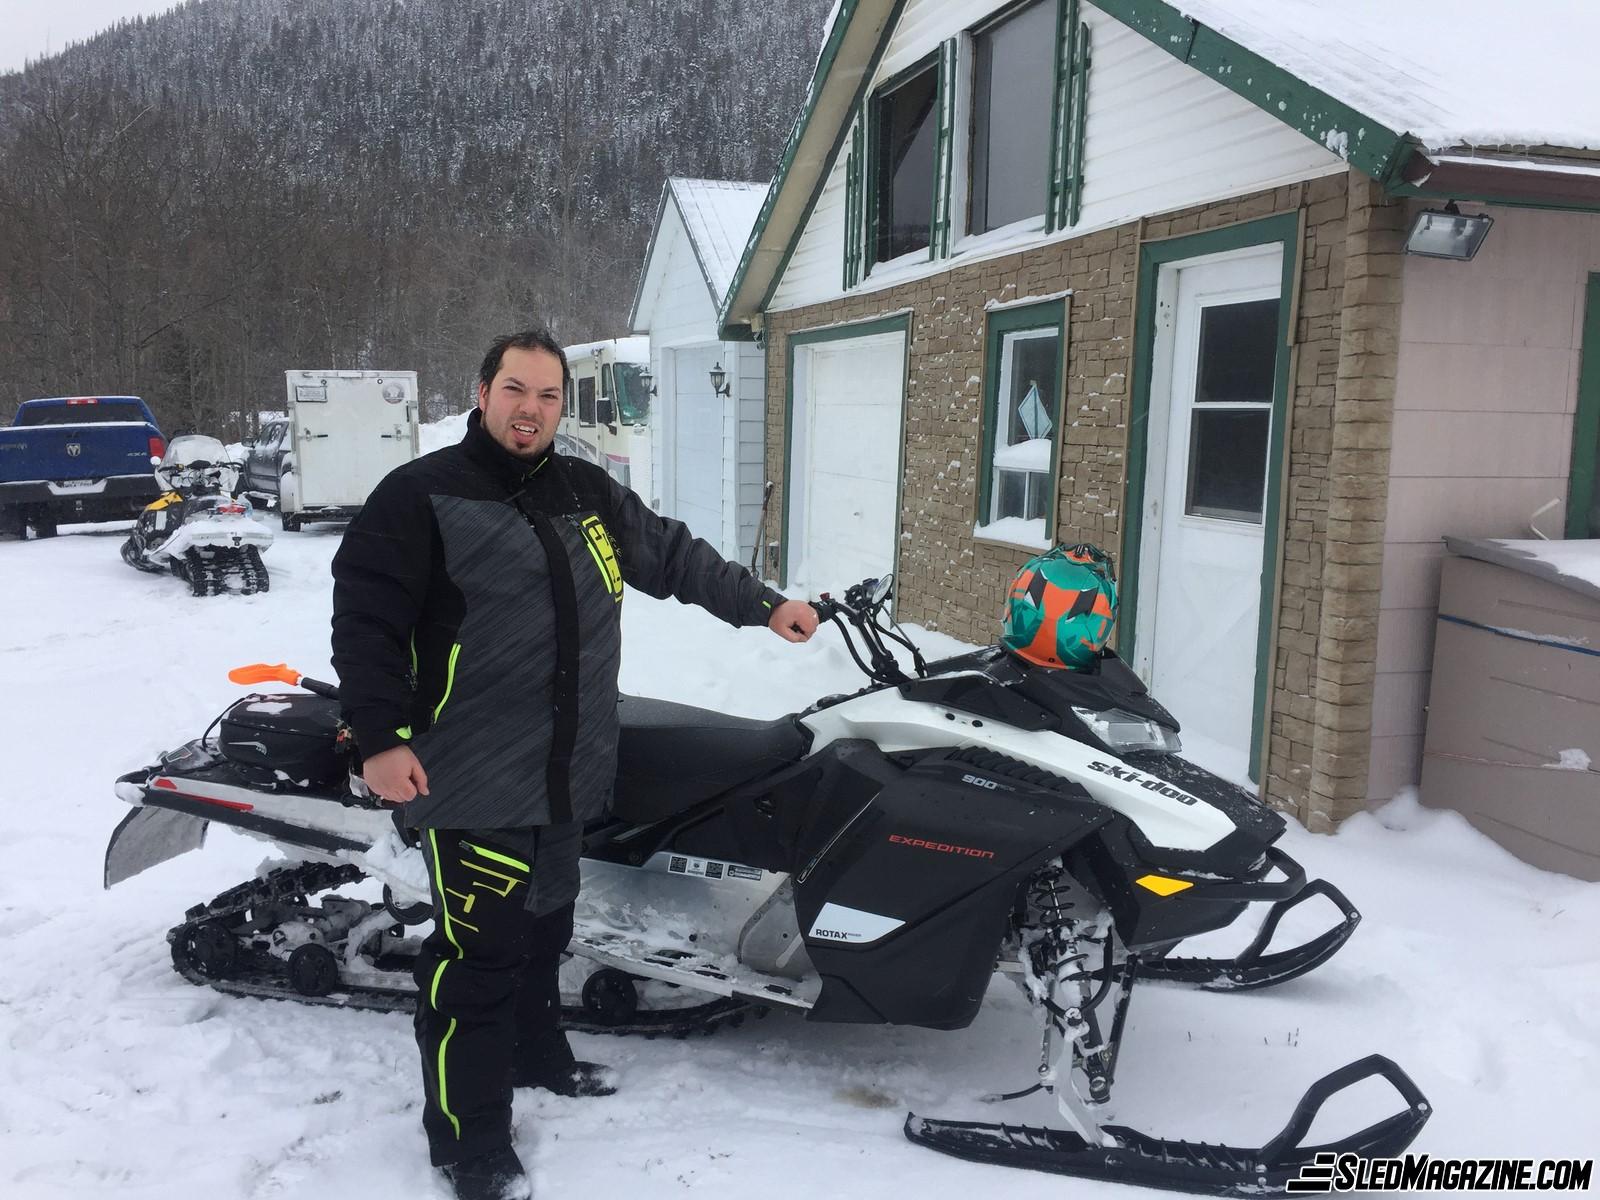 2020 Expedition Sport 900 ACE End of Season Review - Snowmobile - Snowmobiler